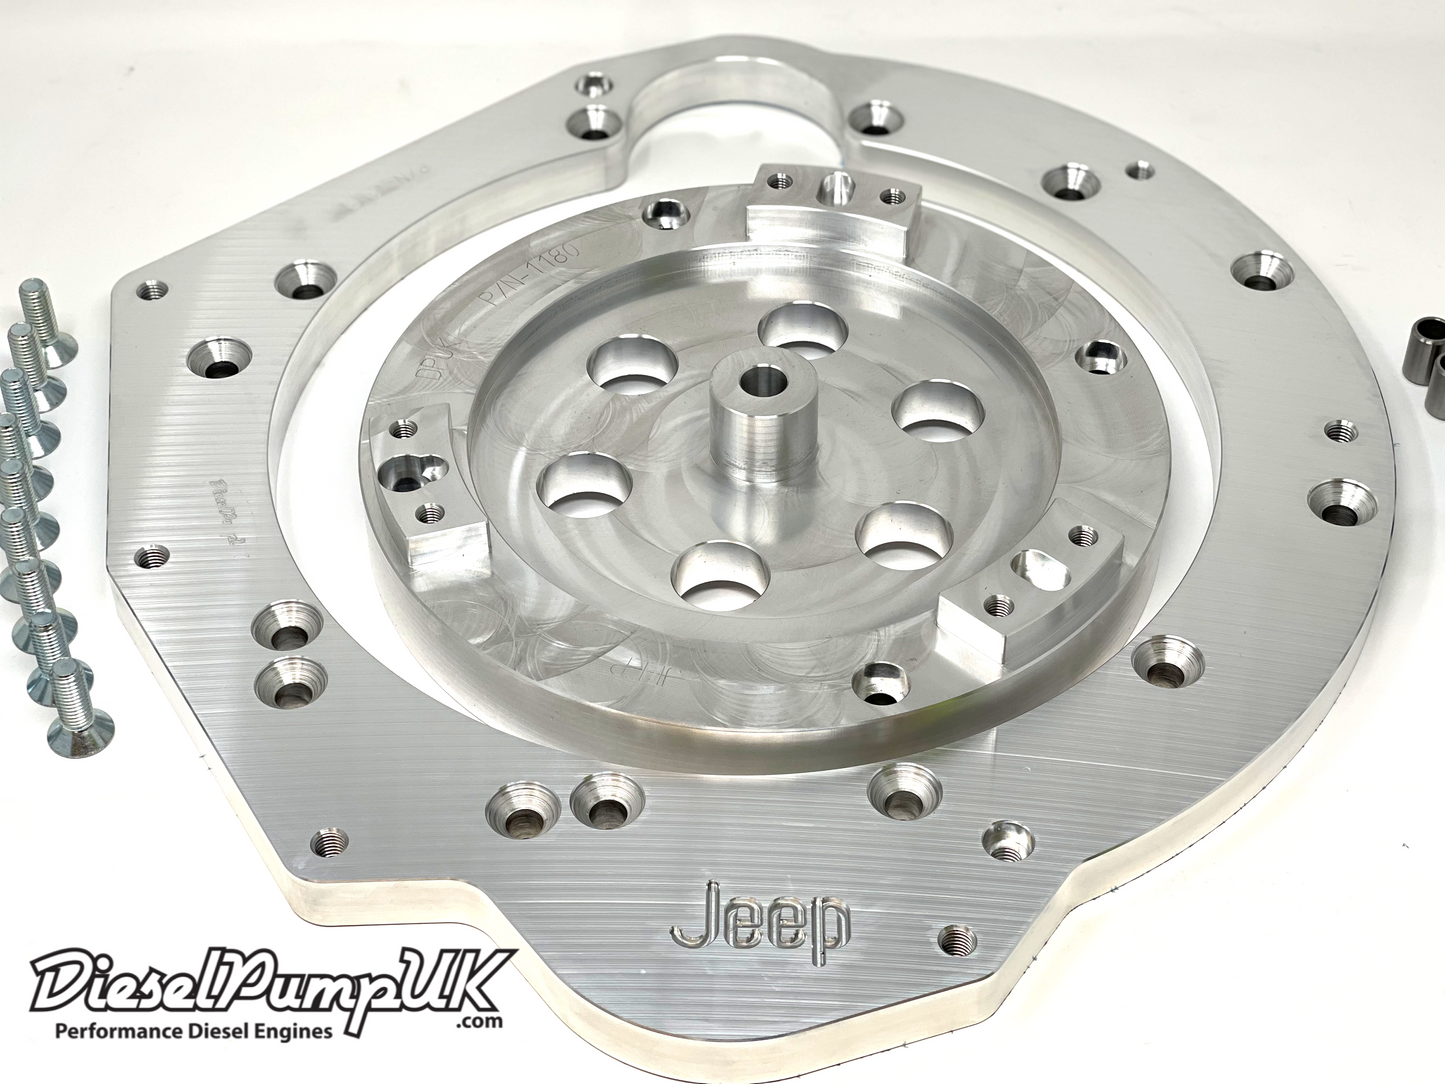 AW4 Jeep Adapter Kit